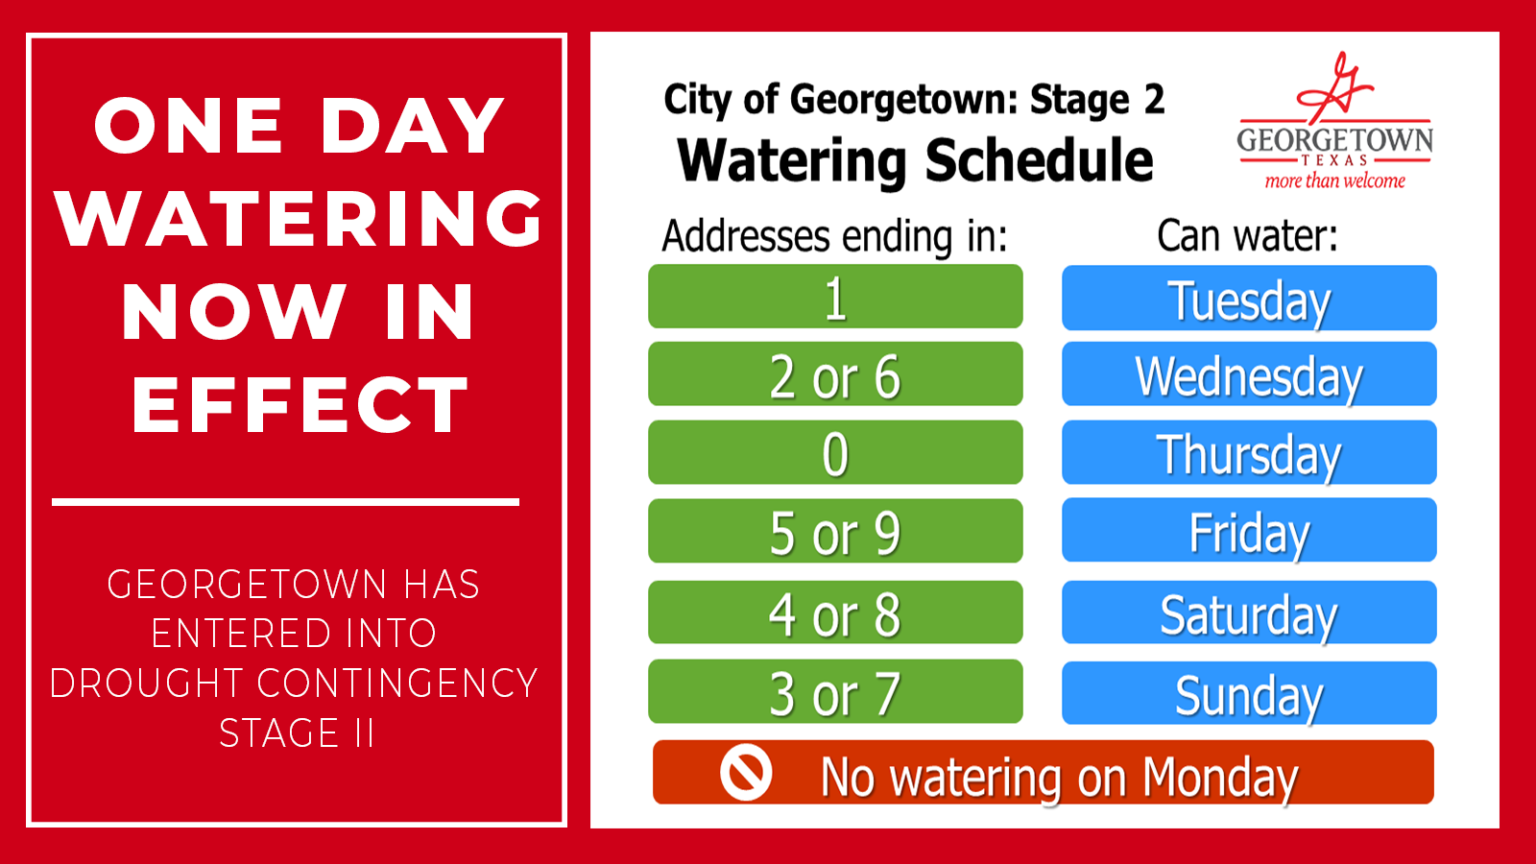 Watering restricted to one day per week as of June 28, 2022 – City of